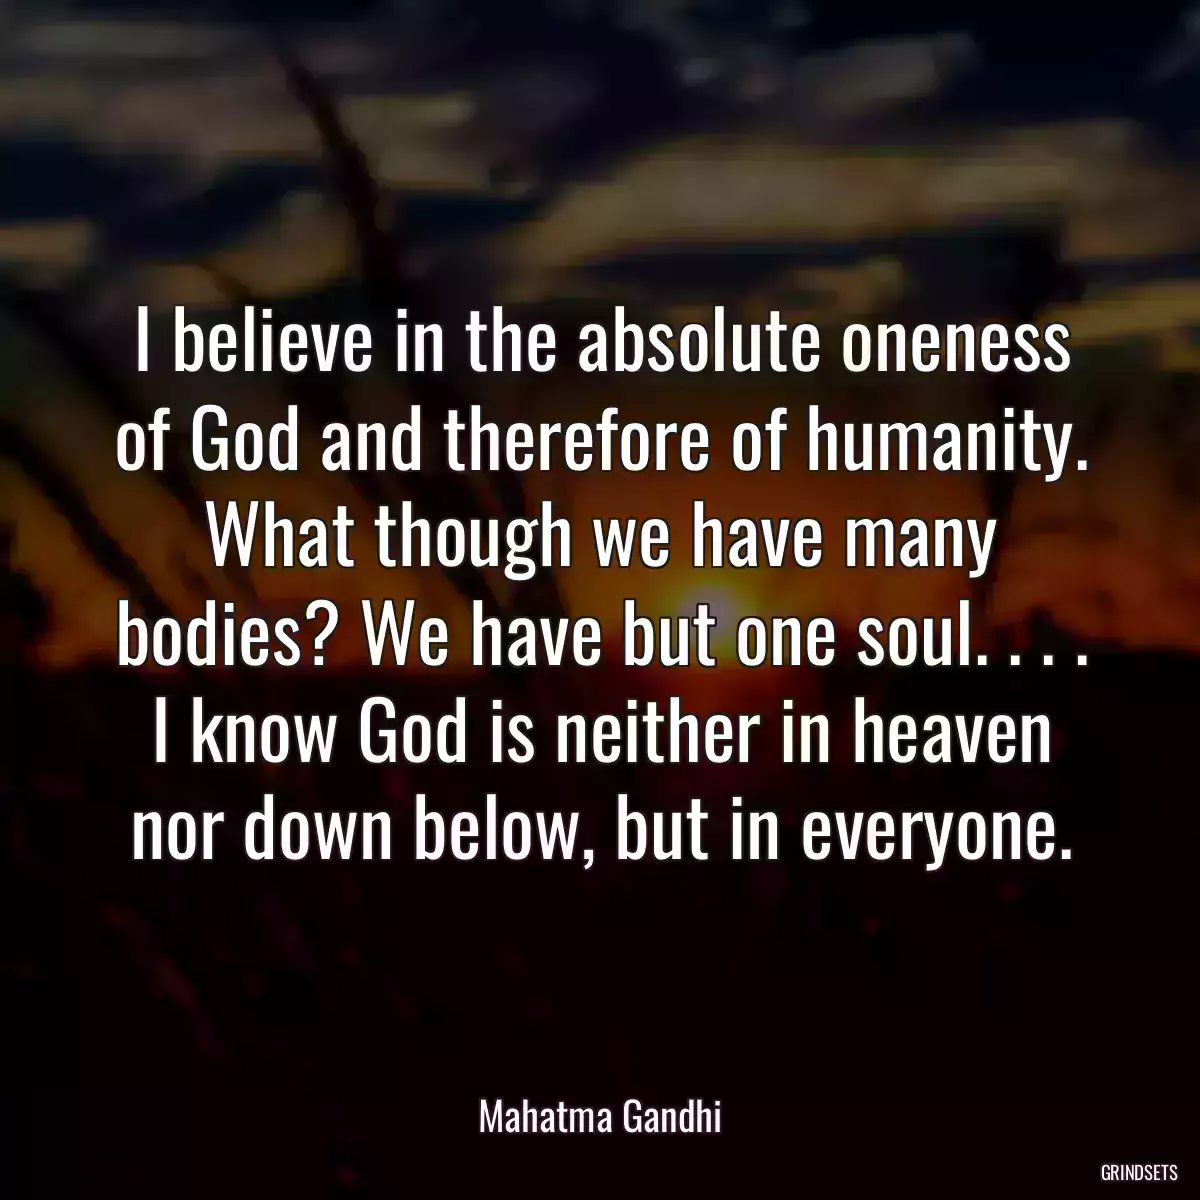 I believe in the absolute oneness of God and therefore of humanity. What though we have many bodies? We have but one soul. . . . I know God is neither in heaven nor down below, but in everyone.